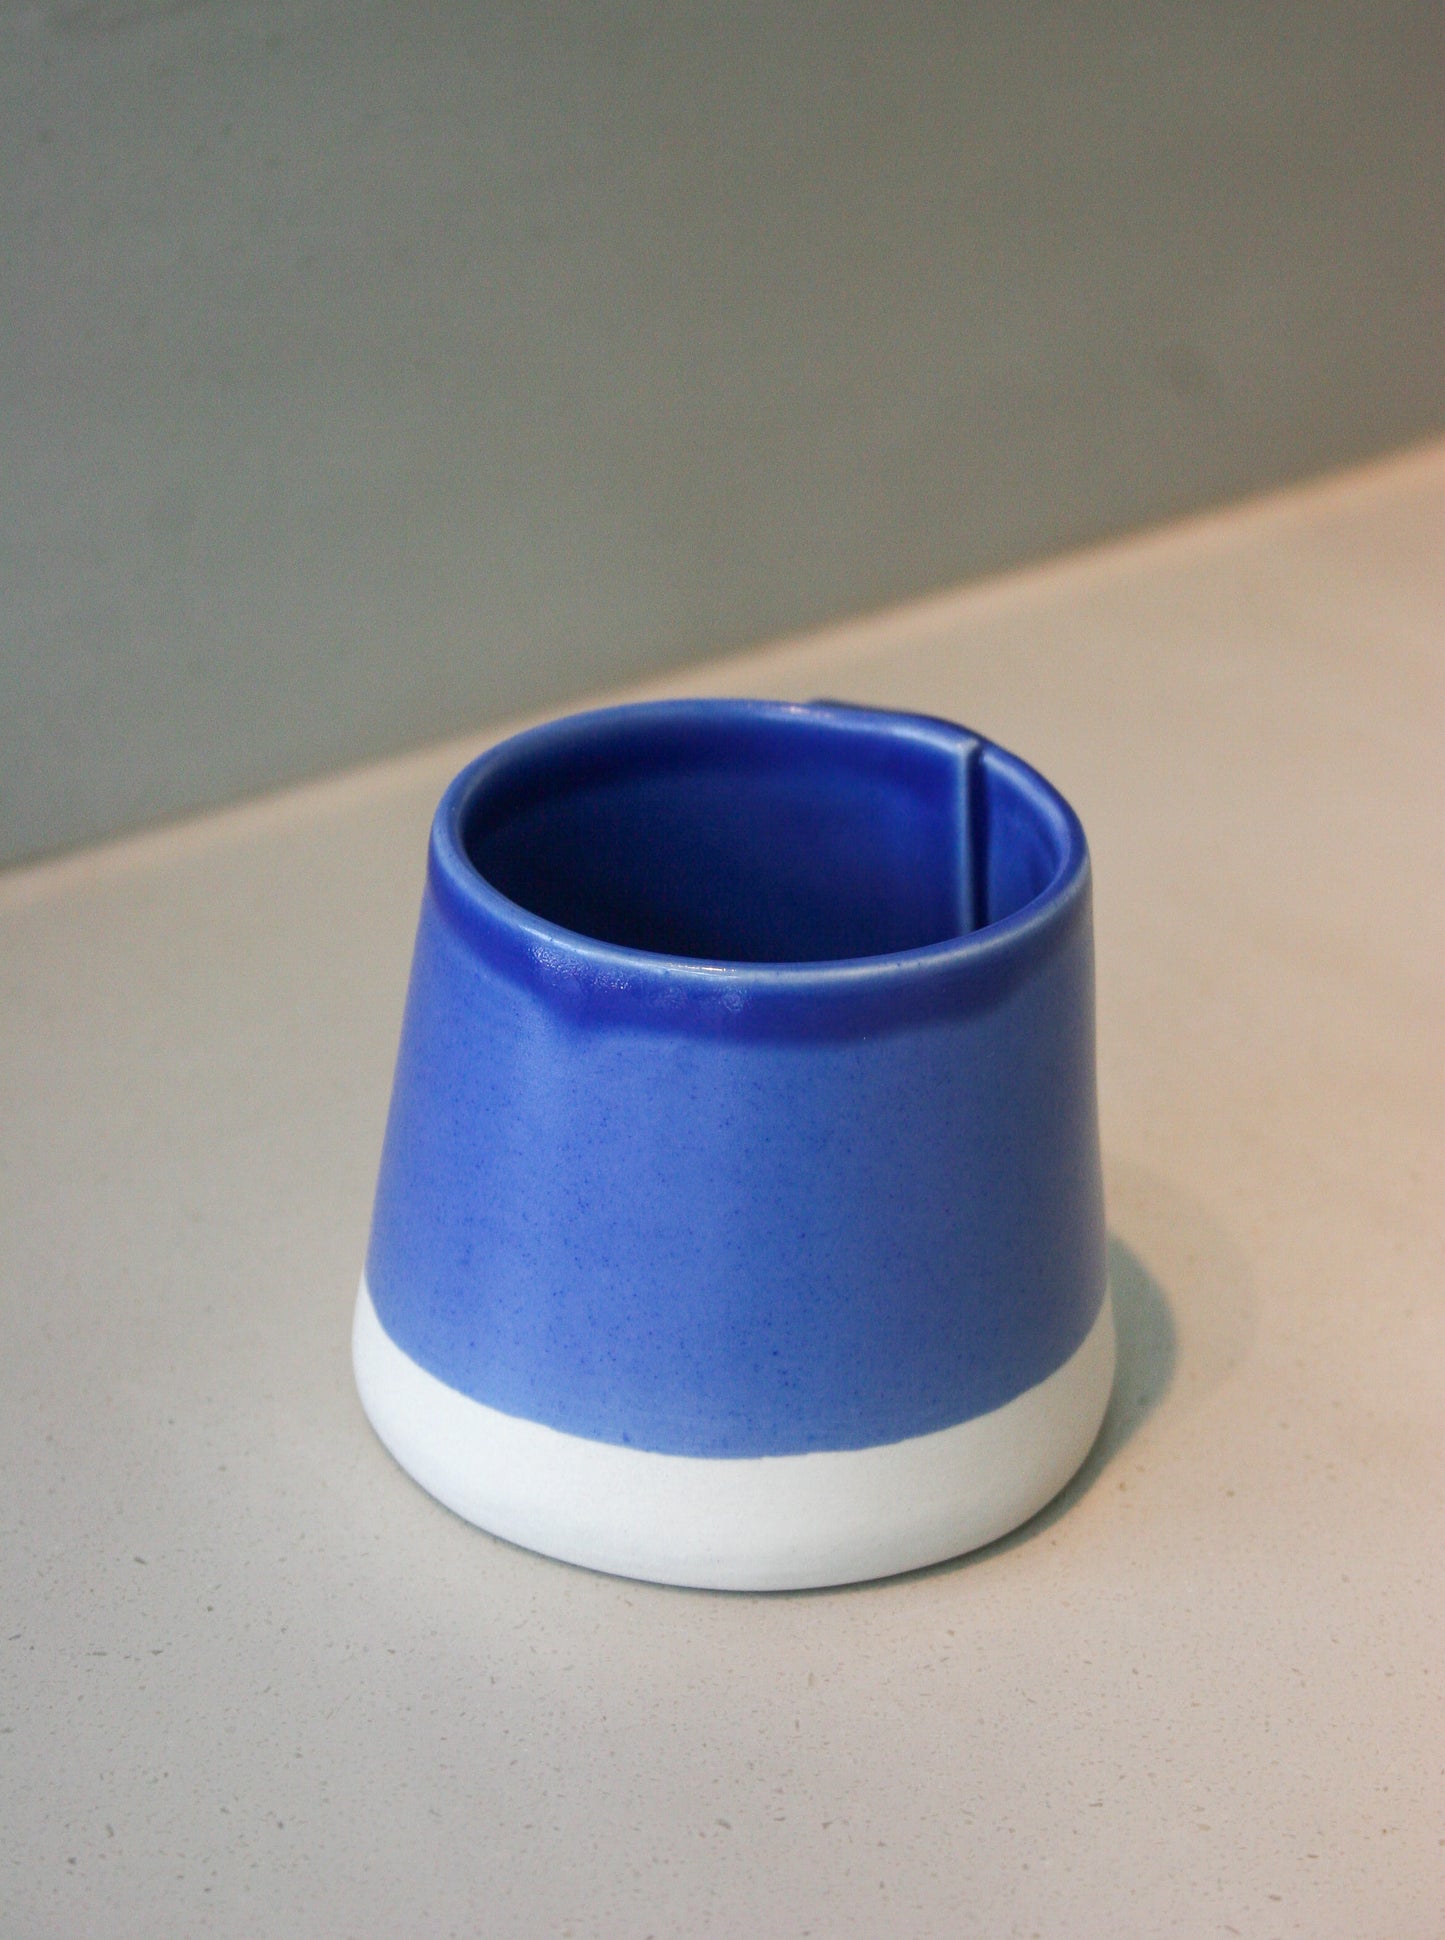 
                  
                    Impact coffee and Atelier Make porcelain coffee cup set
                  
                